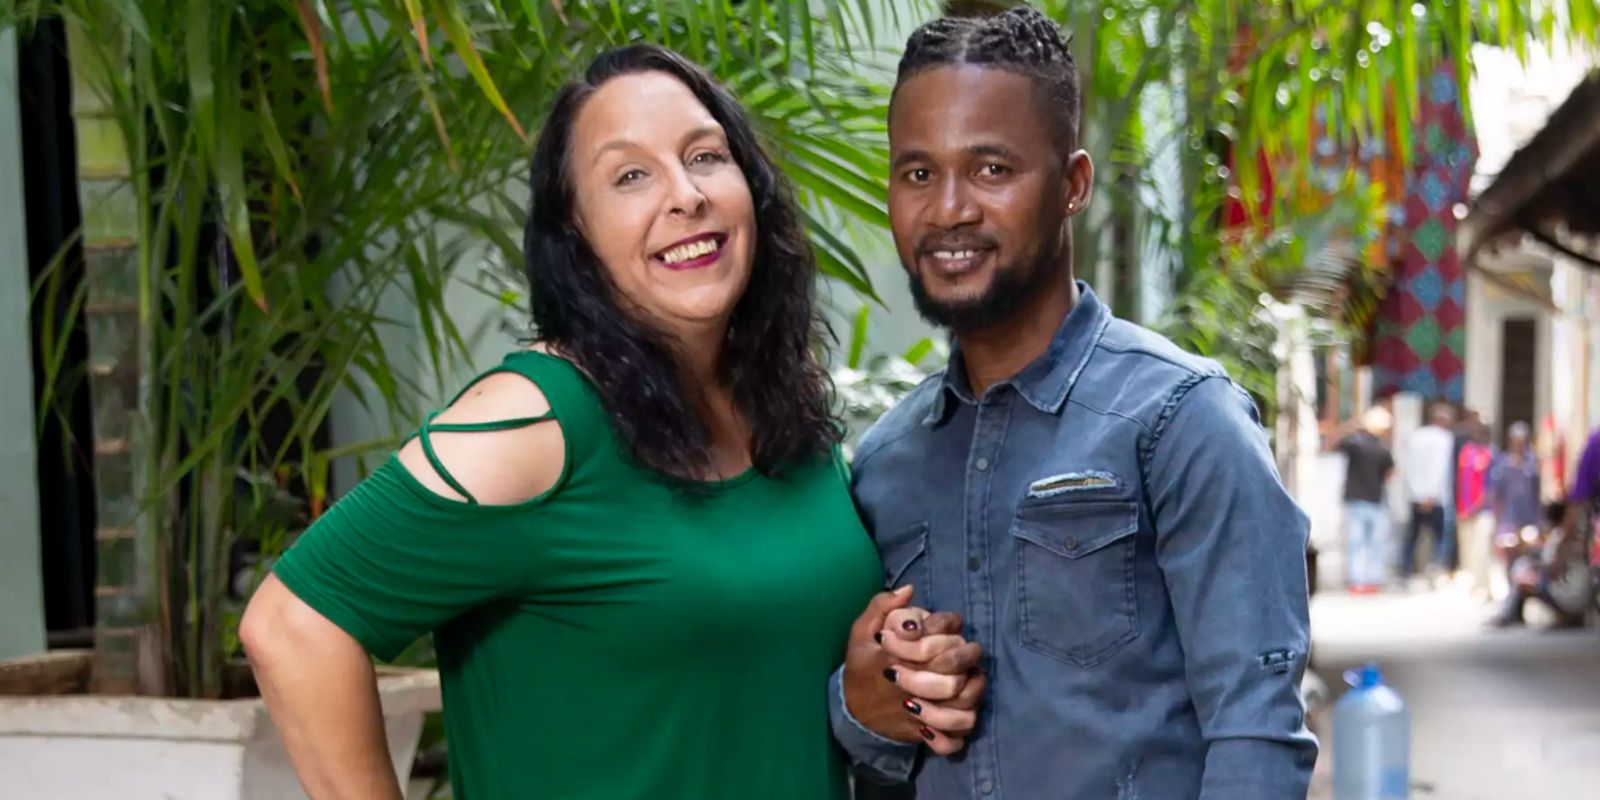 Kim Menzies in green top and Usman Umar Sojaboy in corduroy shirt for 90 Day Fiancé Happily Ever After Season 7